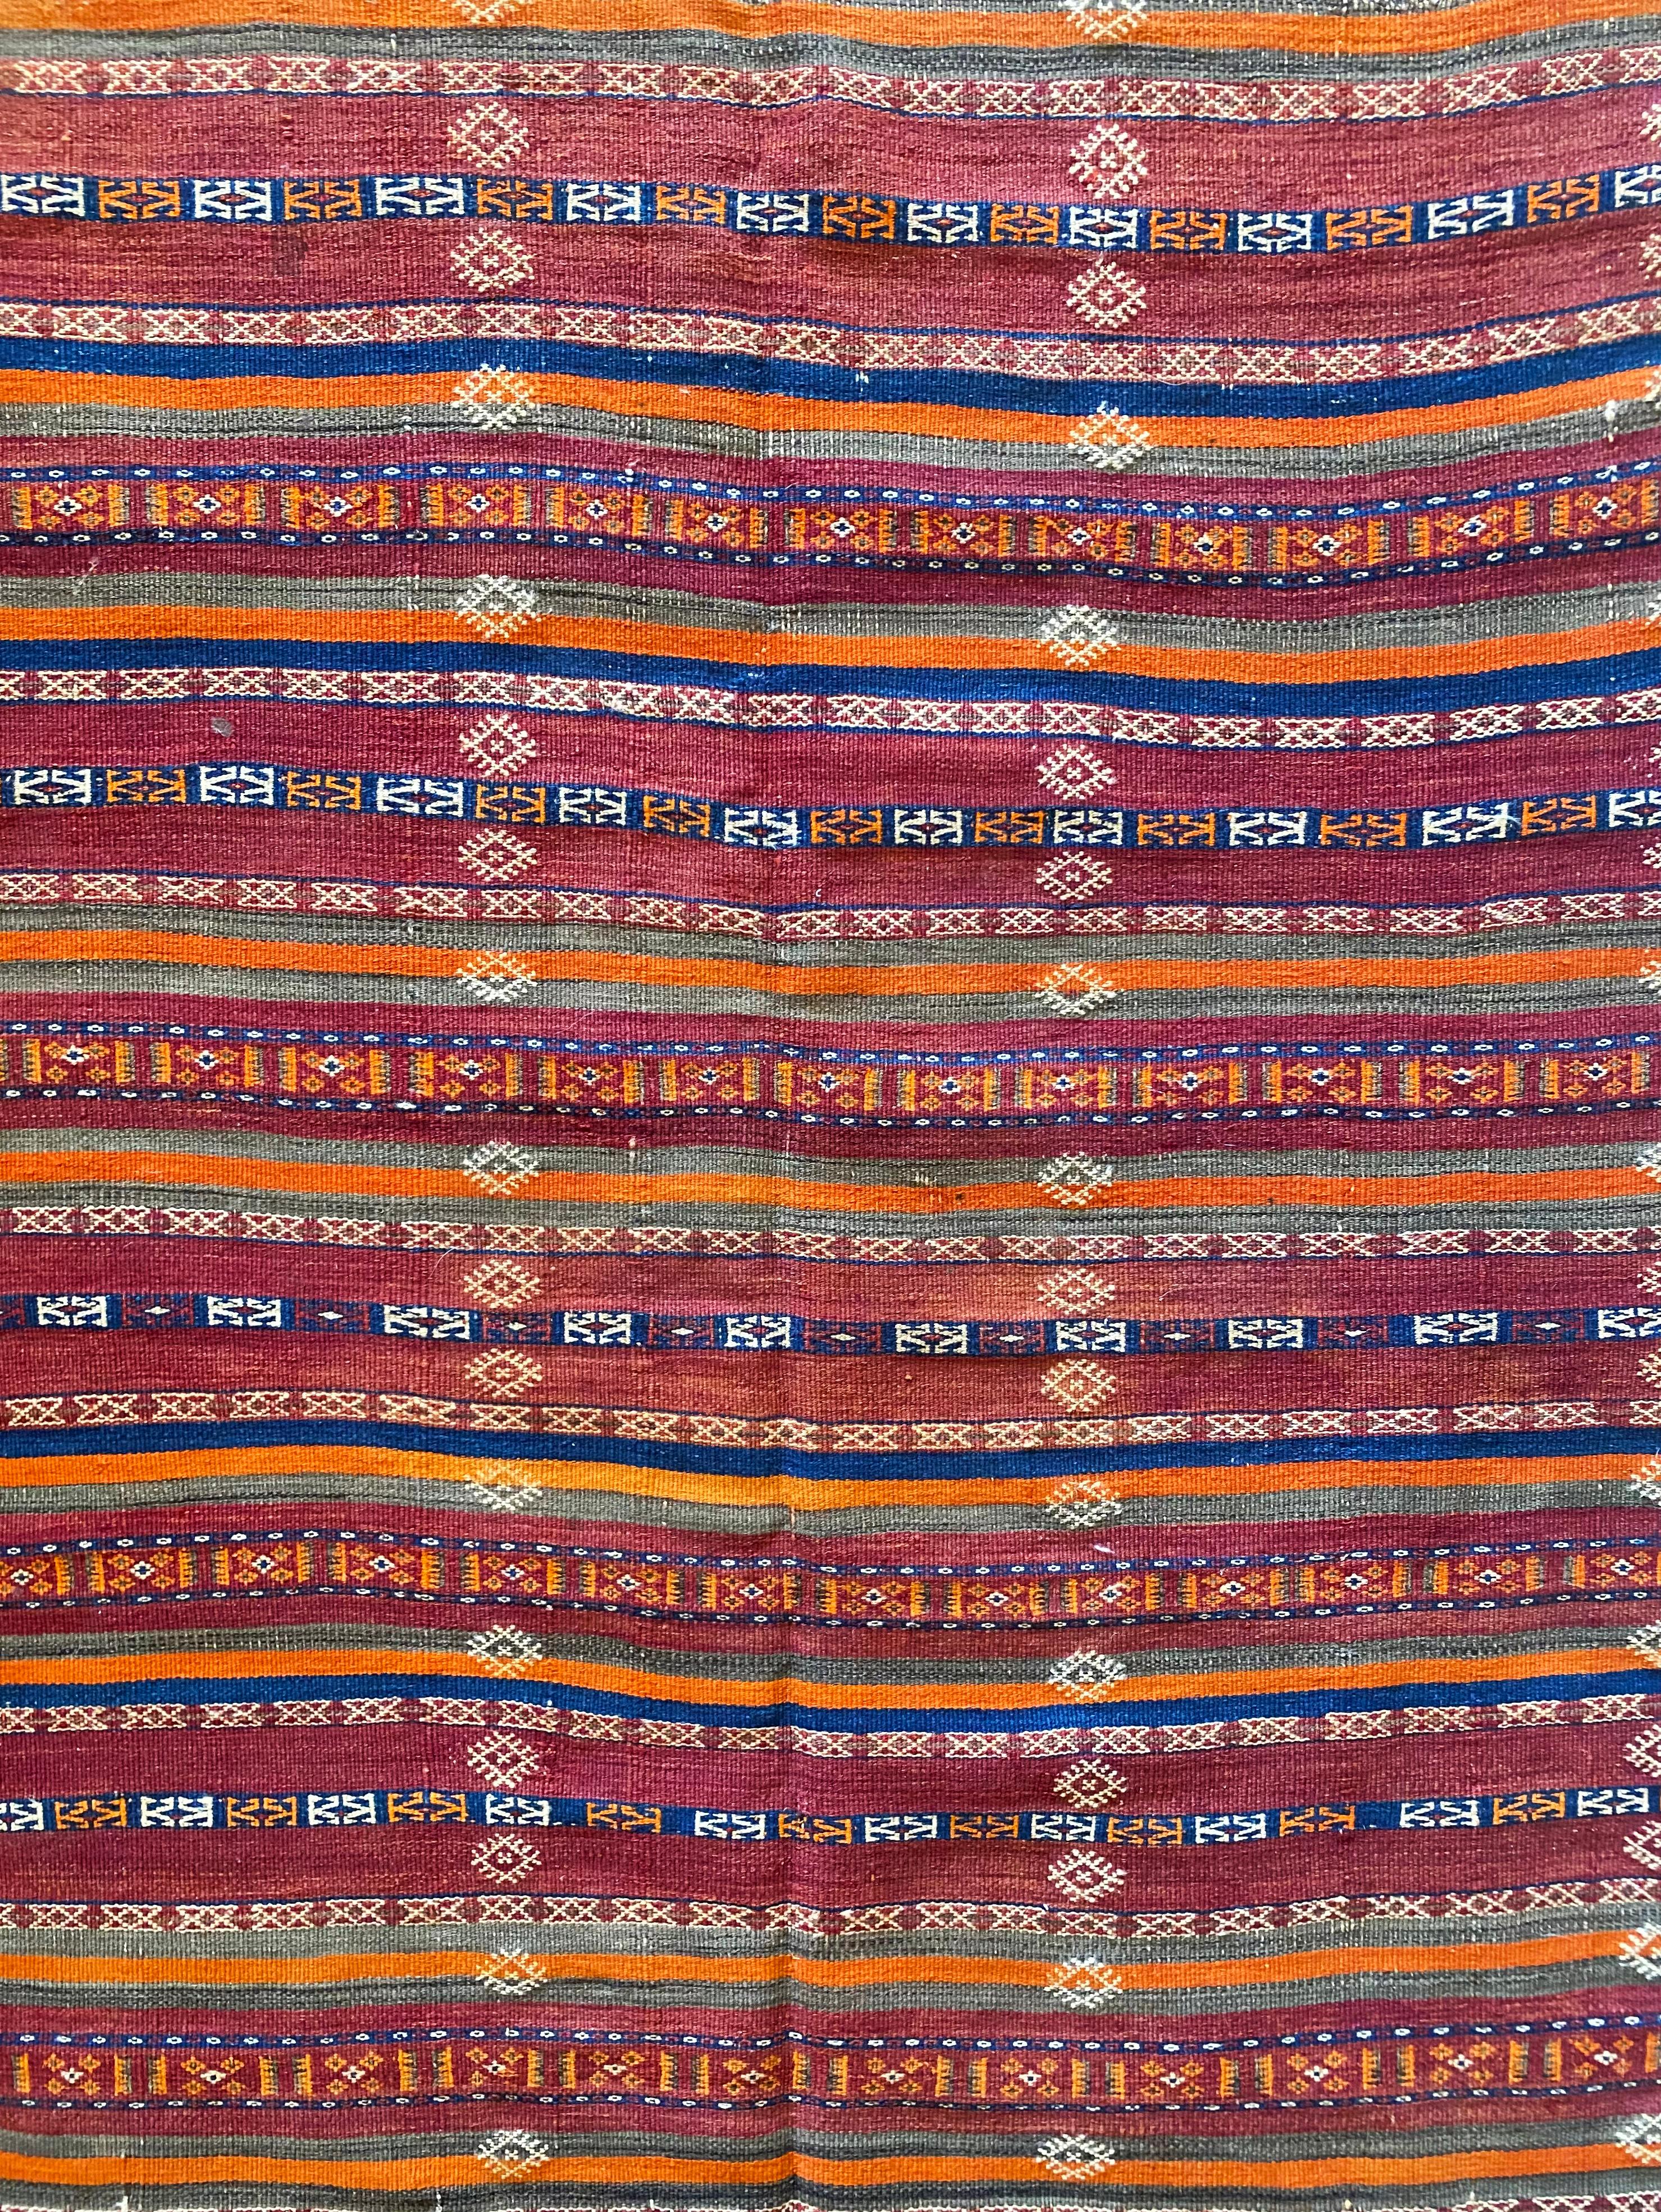 This Antique Turkish Kilim rug features a mix of orange, blue, red, and white dyed bands from wool and tribal motifs. 

Dimensions: Height 317cm x Width 140cm.